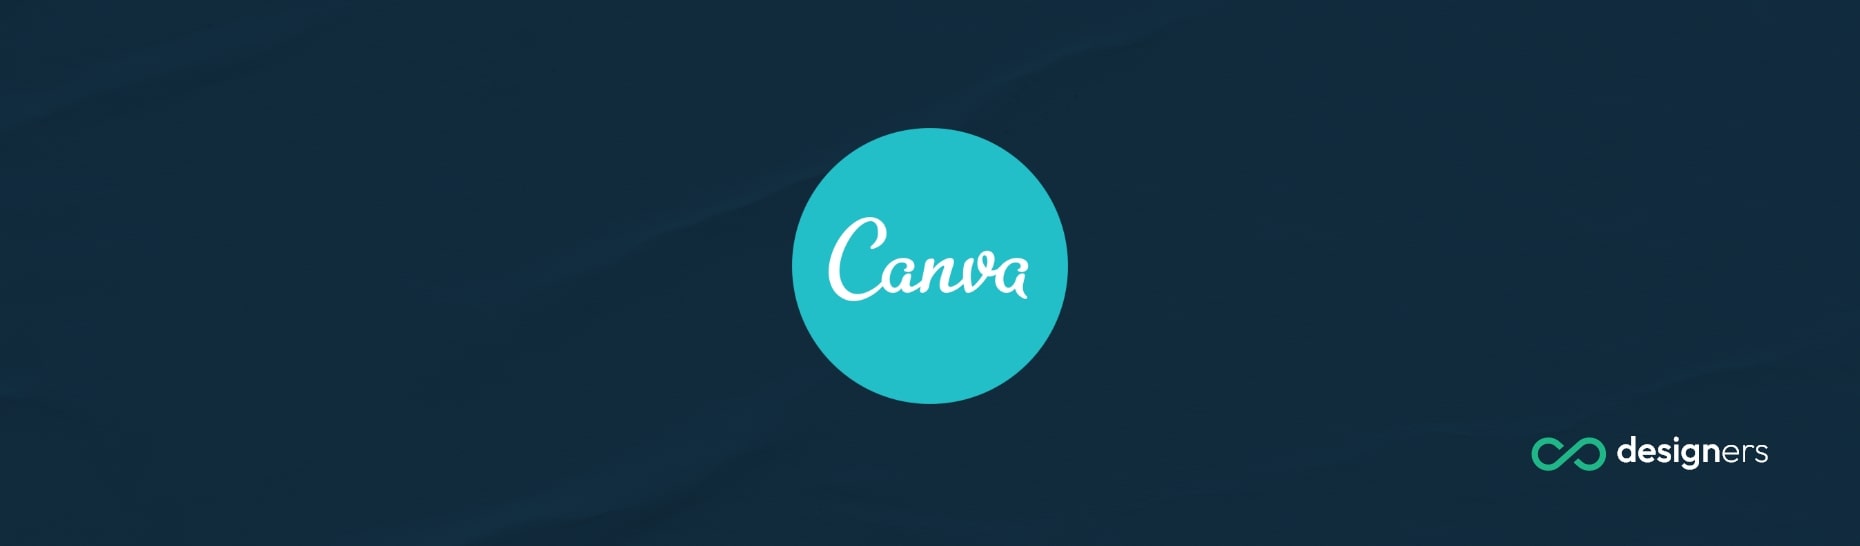 Is Canva Good for Making Websites?